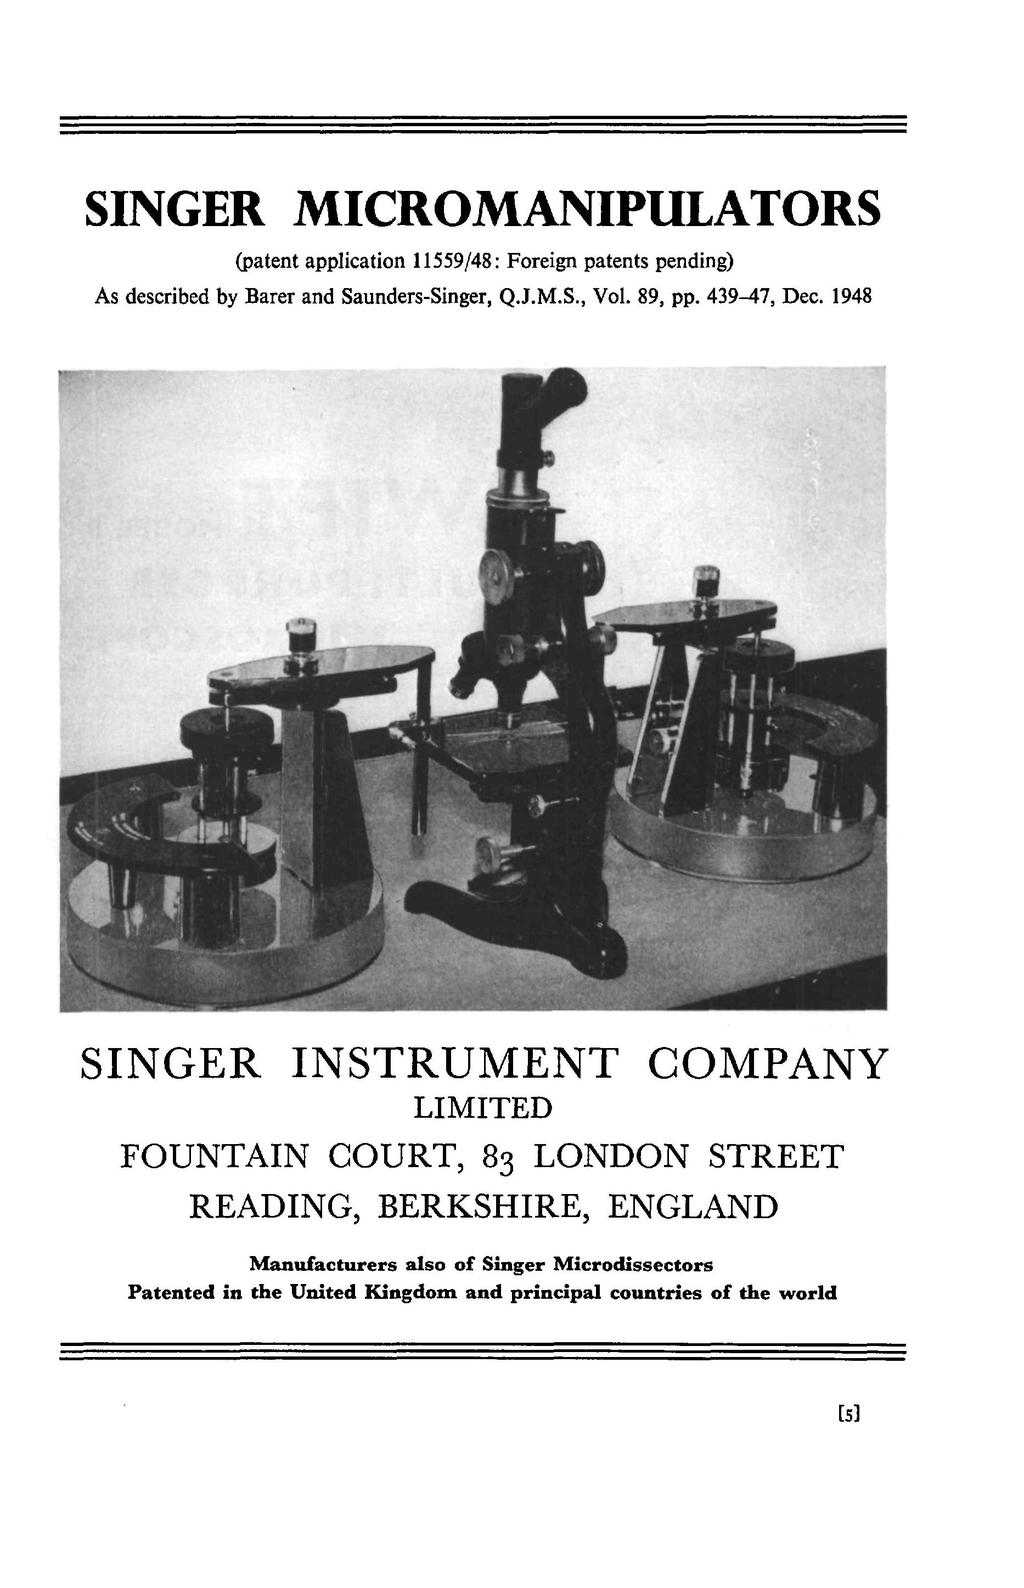 SINGER MICROMANIPULATORS (patent application 11559/48: Foreign patents pending) As described by Barer and Saunders-Singer, Q.J.M.S., Vol. 89, pp. 439-47, Dec.